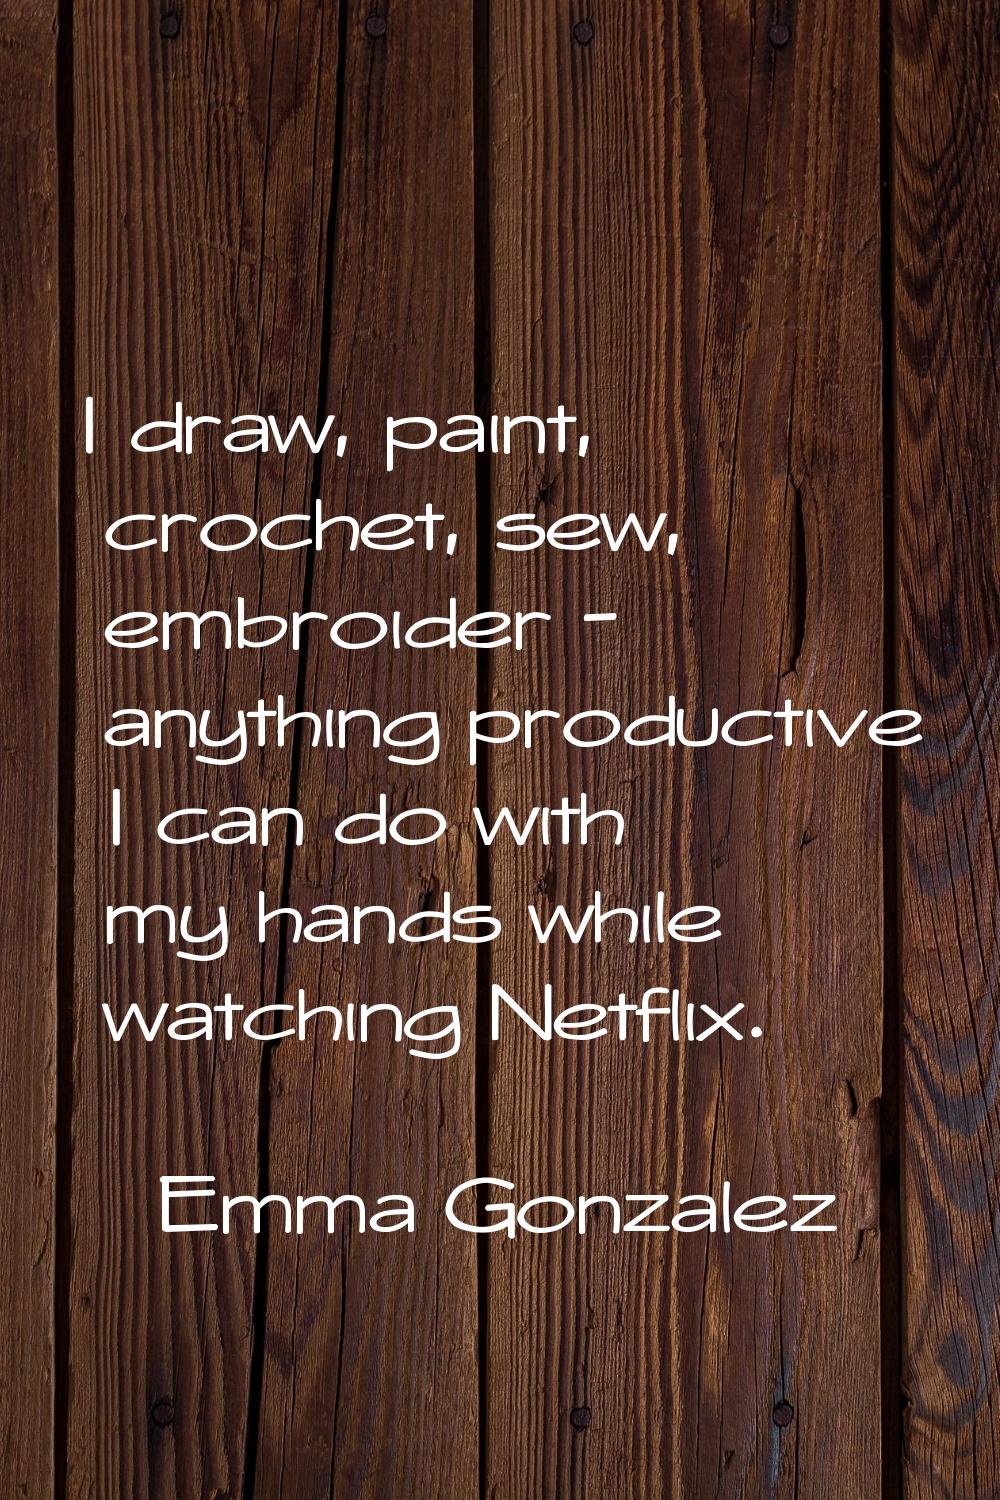 I draw, paint, crochet, sew, embroider - anything productive I can do with my hands while watching 